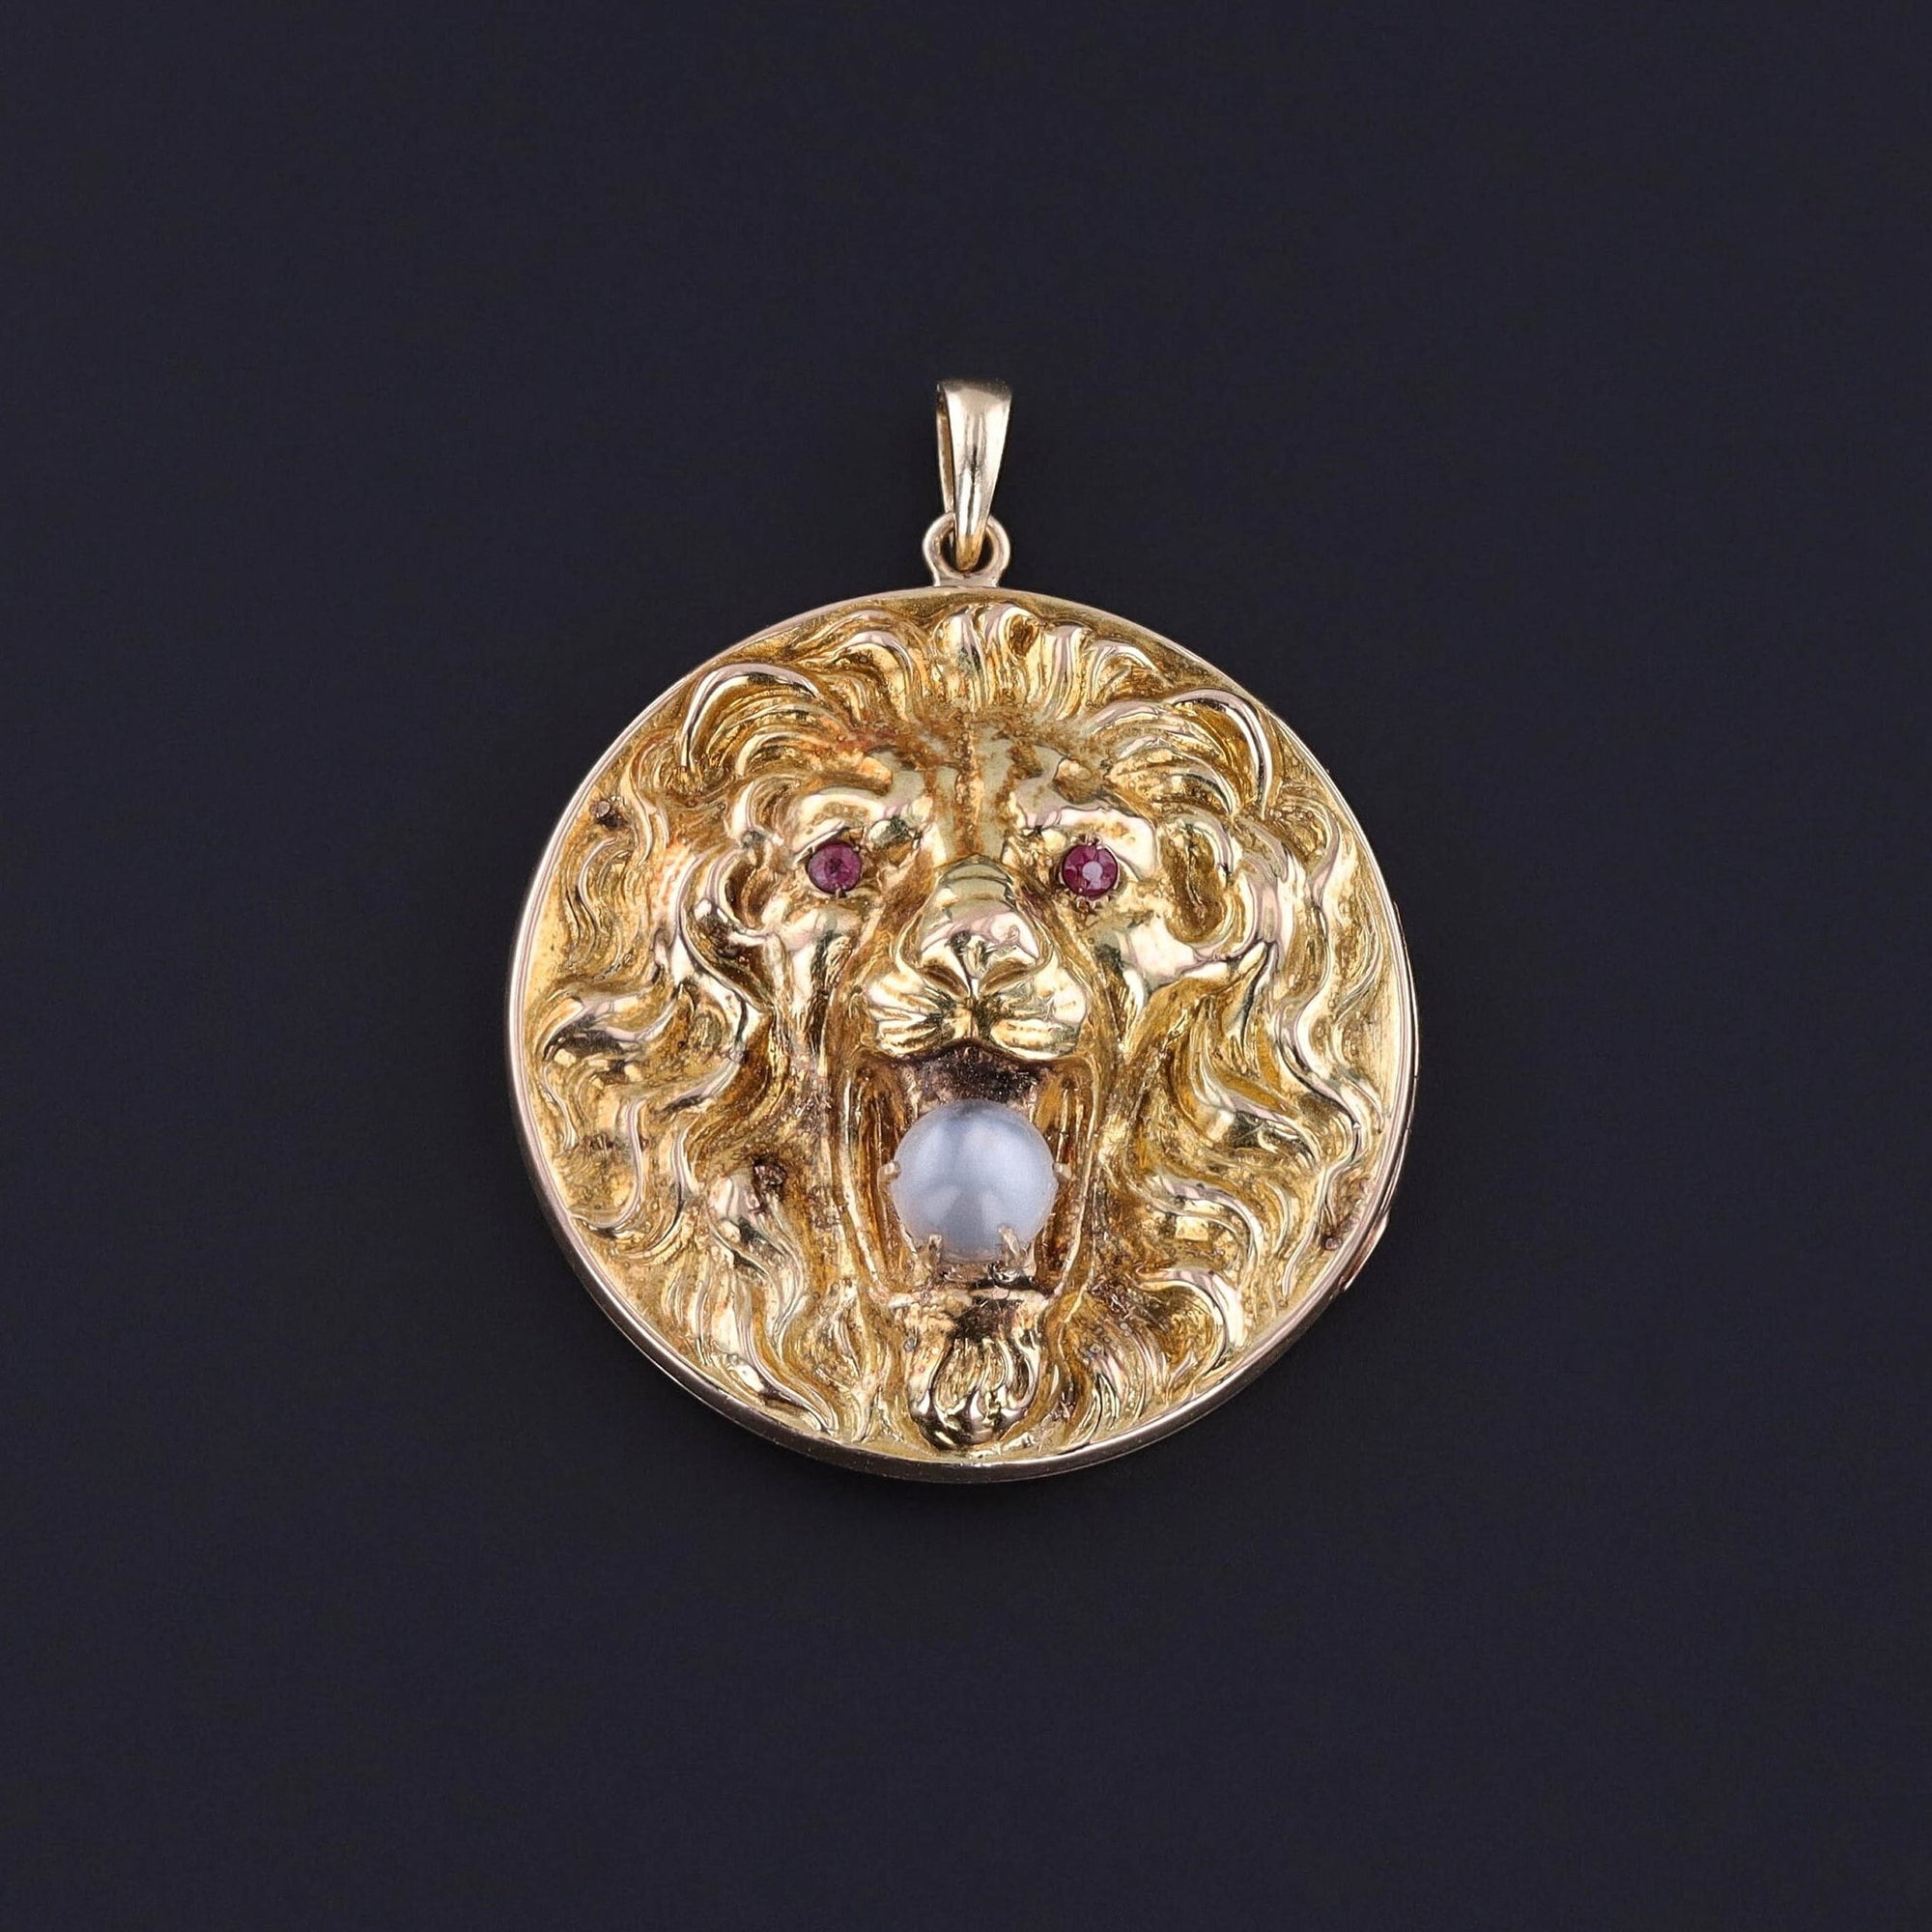 An antique lion locket from the Art Nouveau era. The piece is 10k gold and the lion has a moonstone bead in its teeth. The piece is in good condition and perfect for everyday wear.